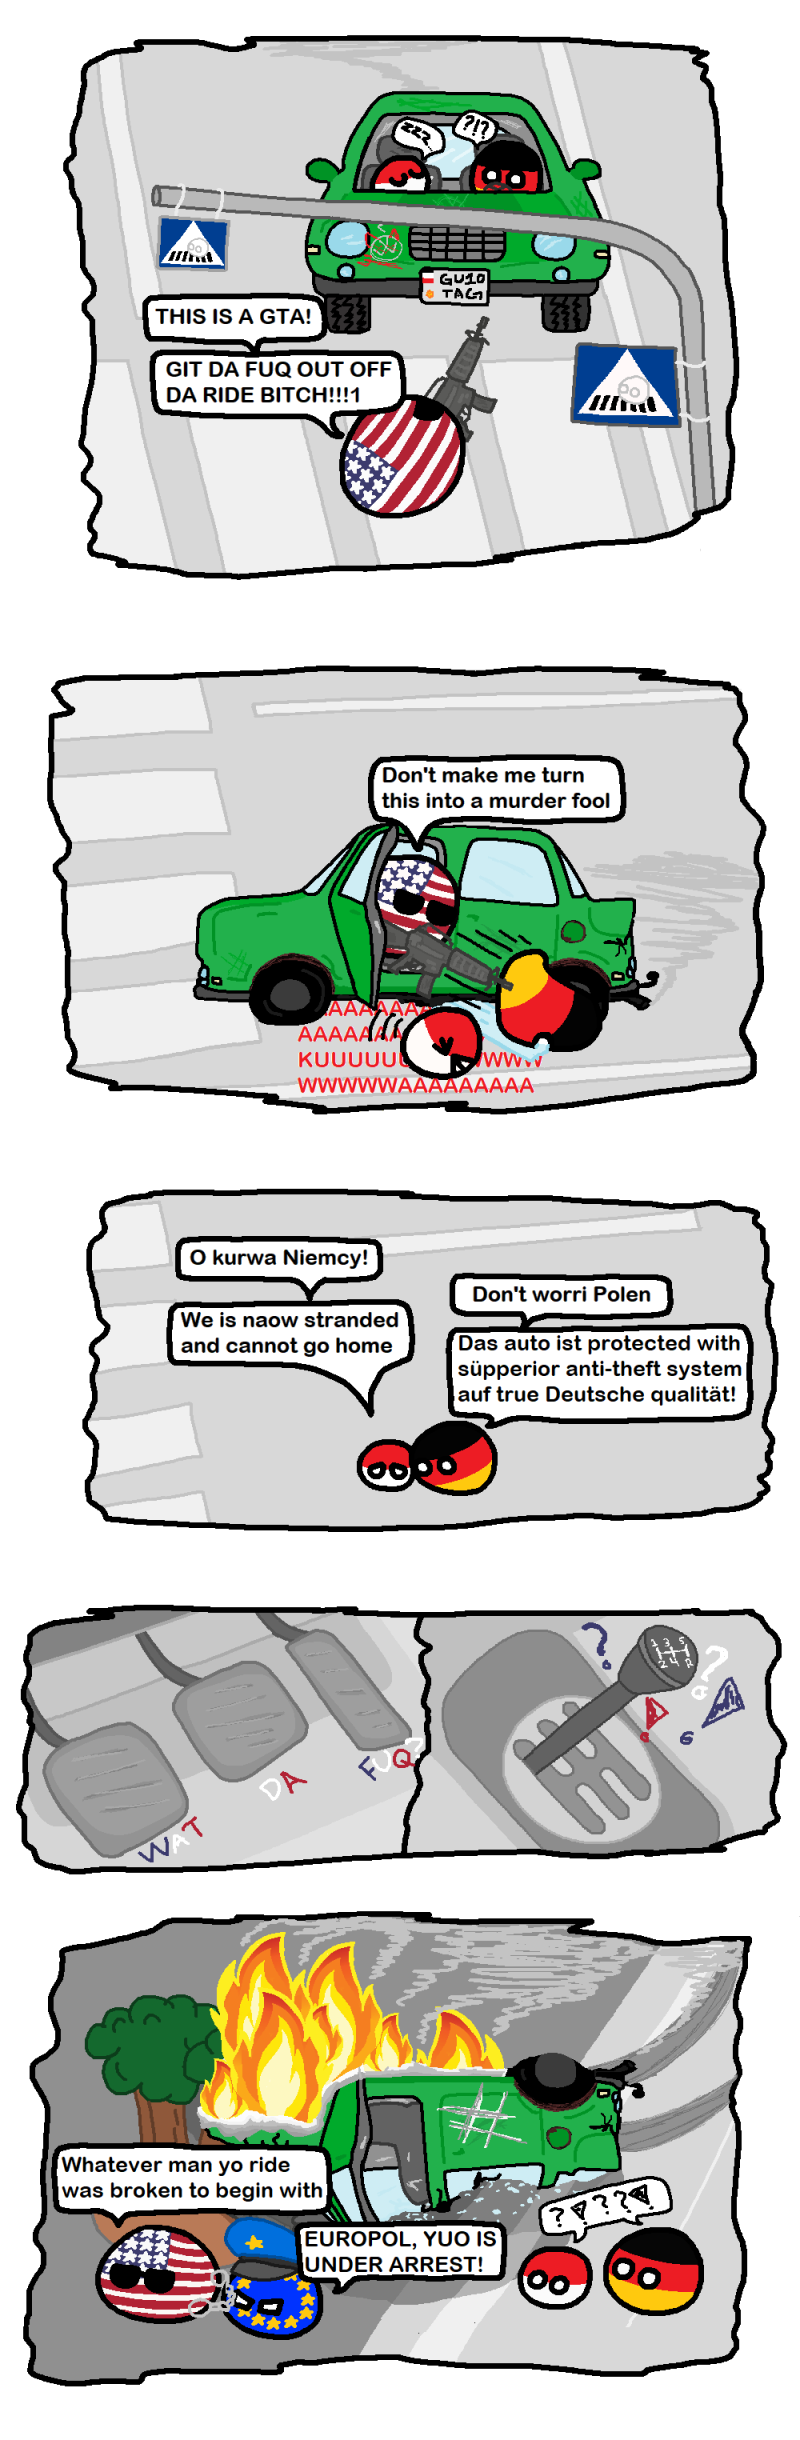 Illustration for article titled Remember Daily Polandball? I Remember Daily Polandball